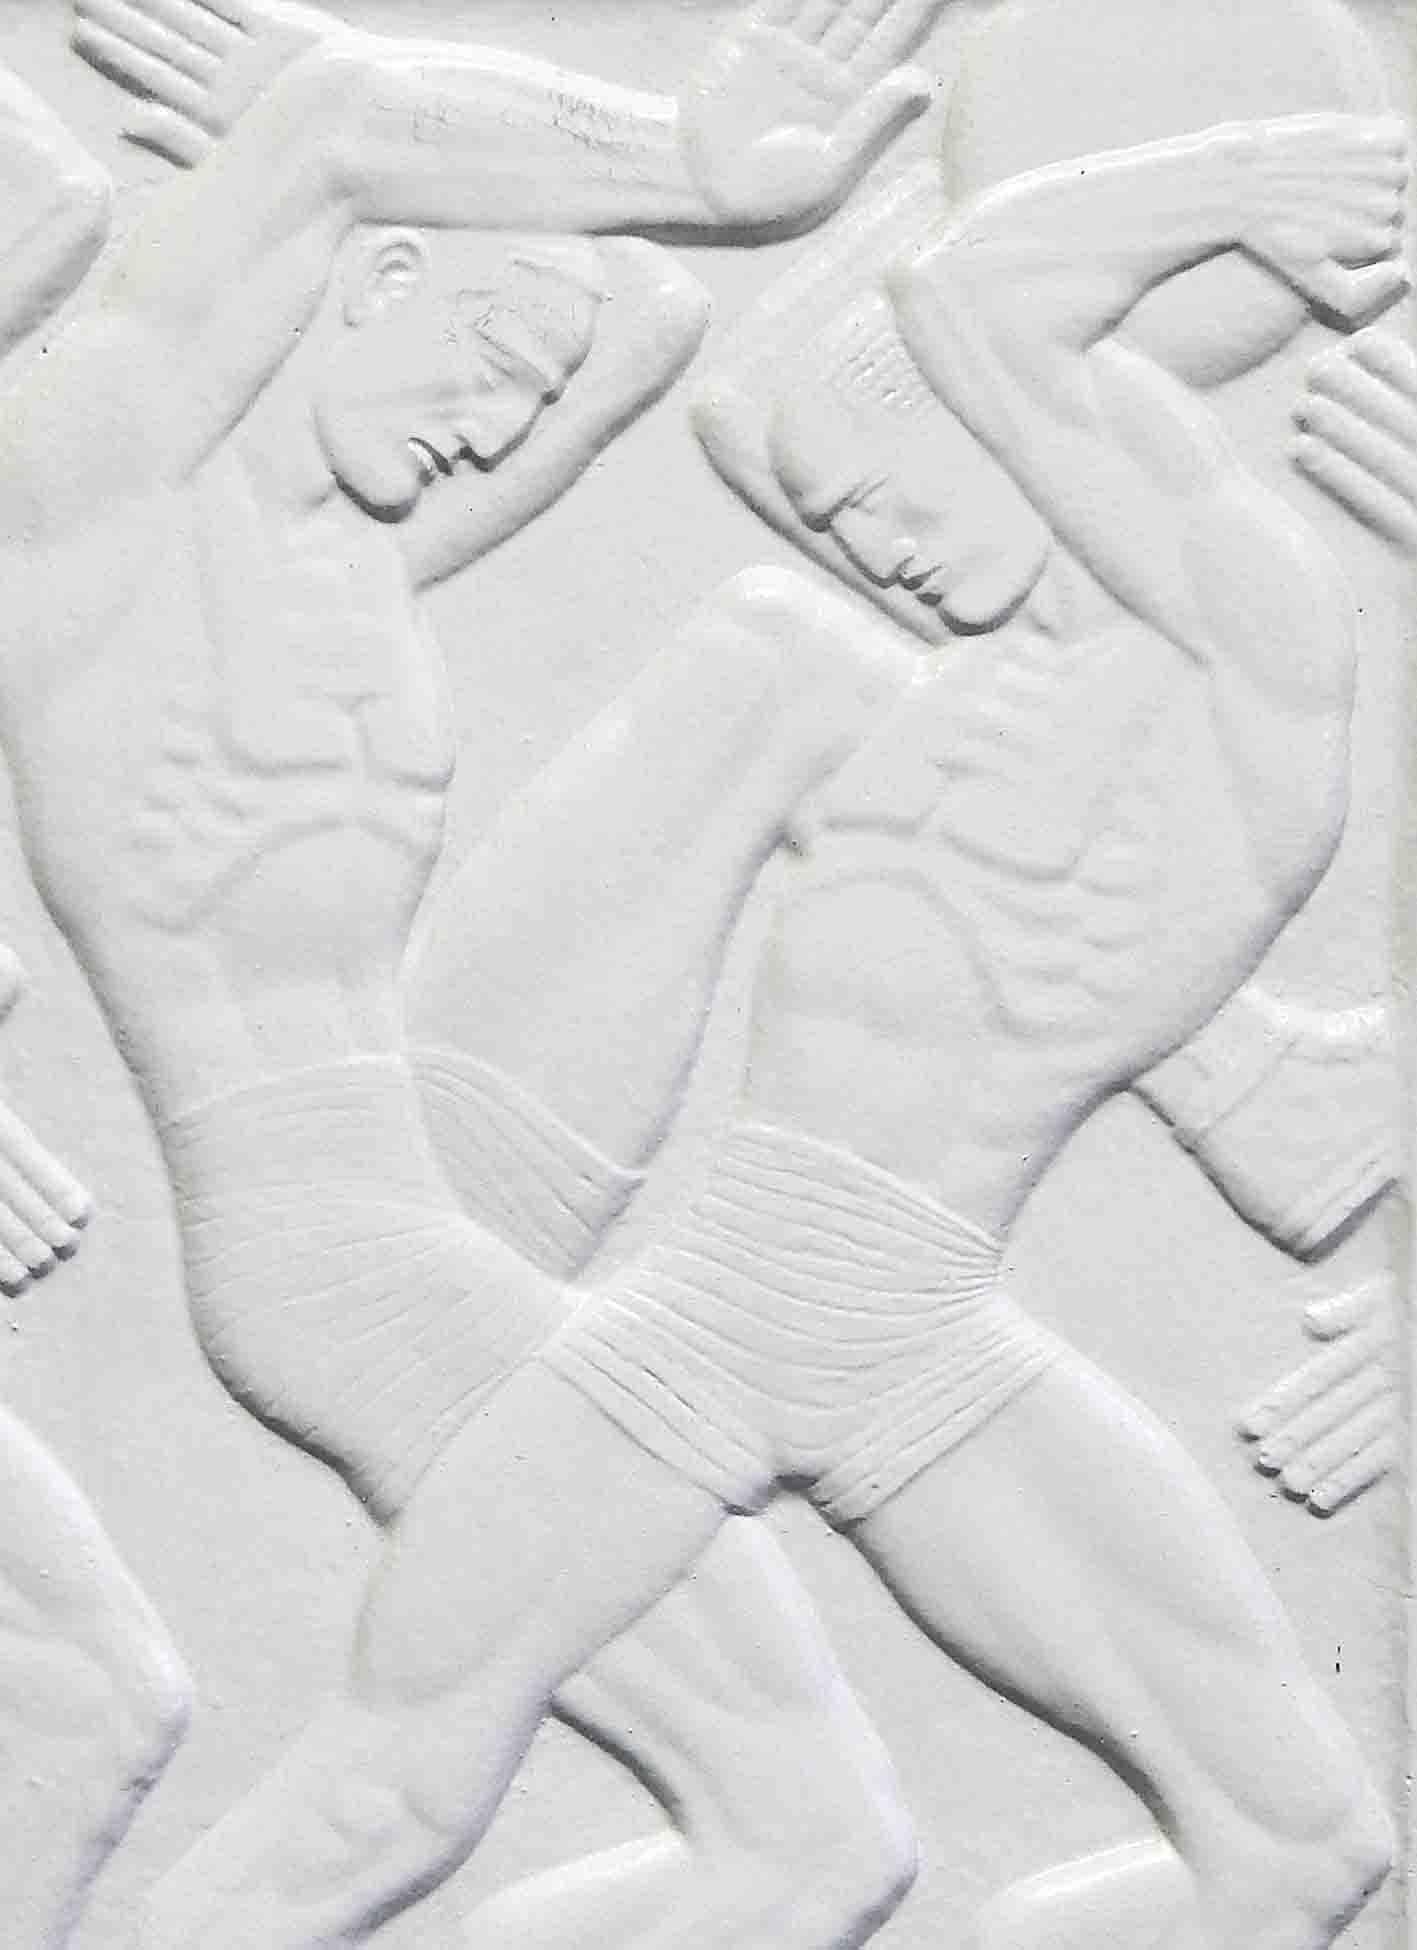 A remarkable and unique relief panel in painted plaster, this high-energy depiction of several male athletes struggling for a medicine ball is a Classic example of stylized Art Deco sculpture. The crisscrossing of the limbs of the four athletes nude